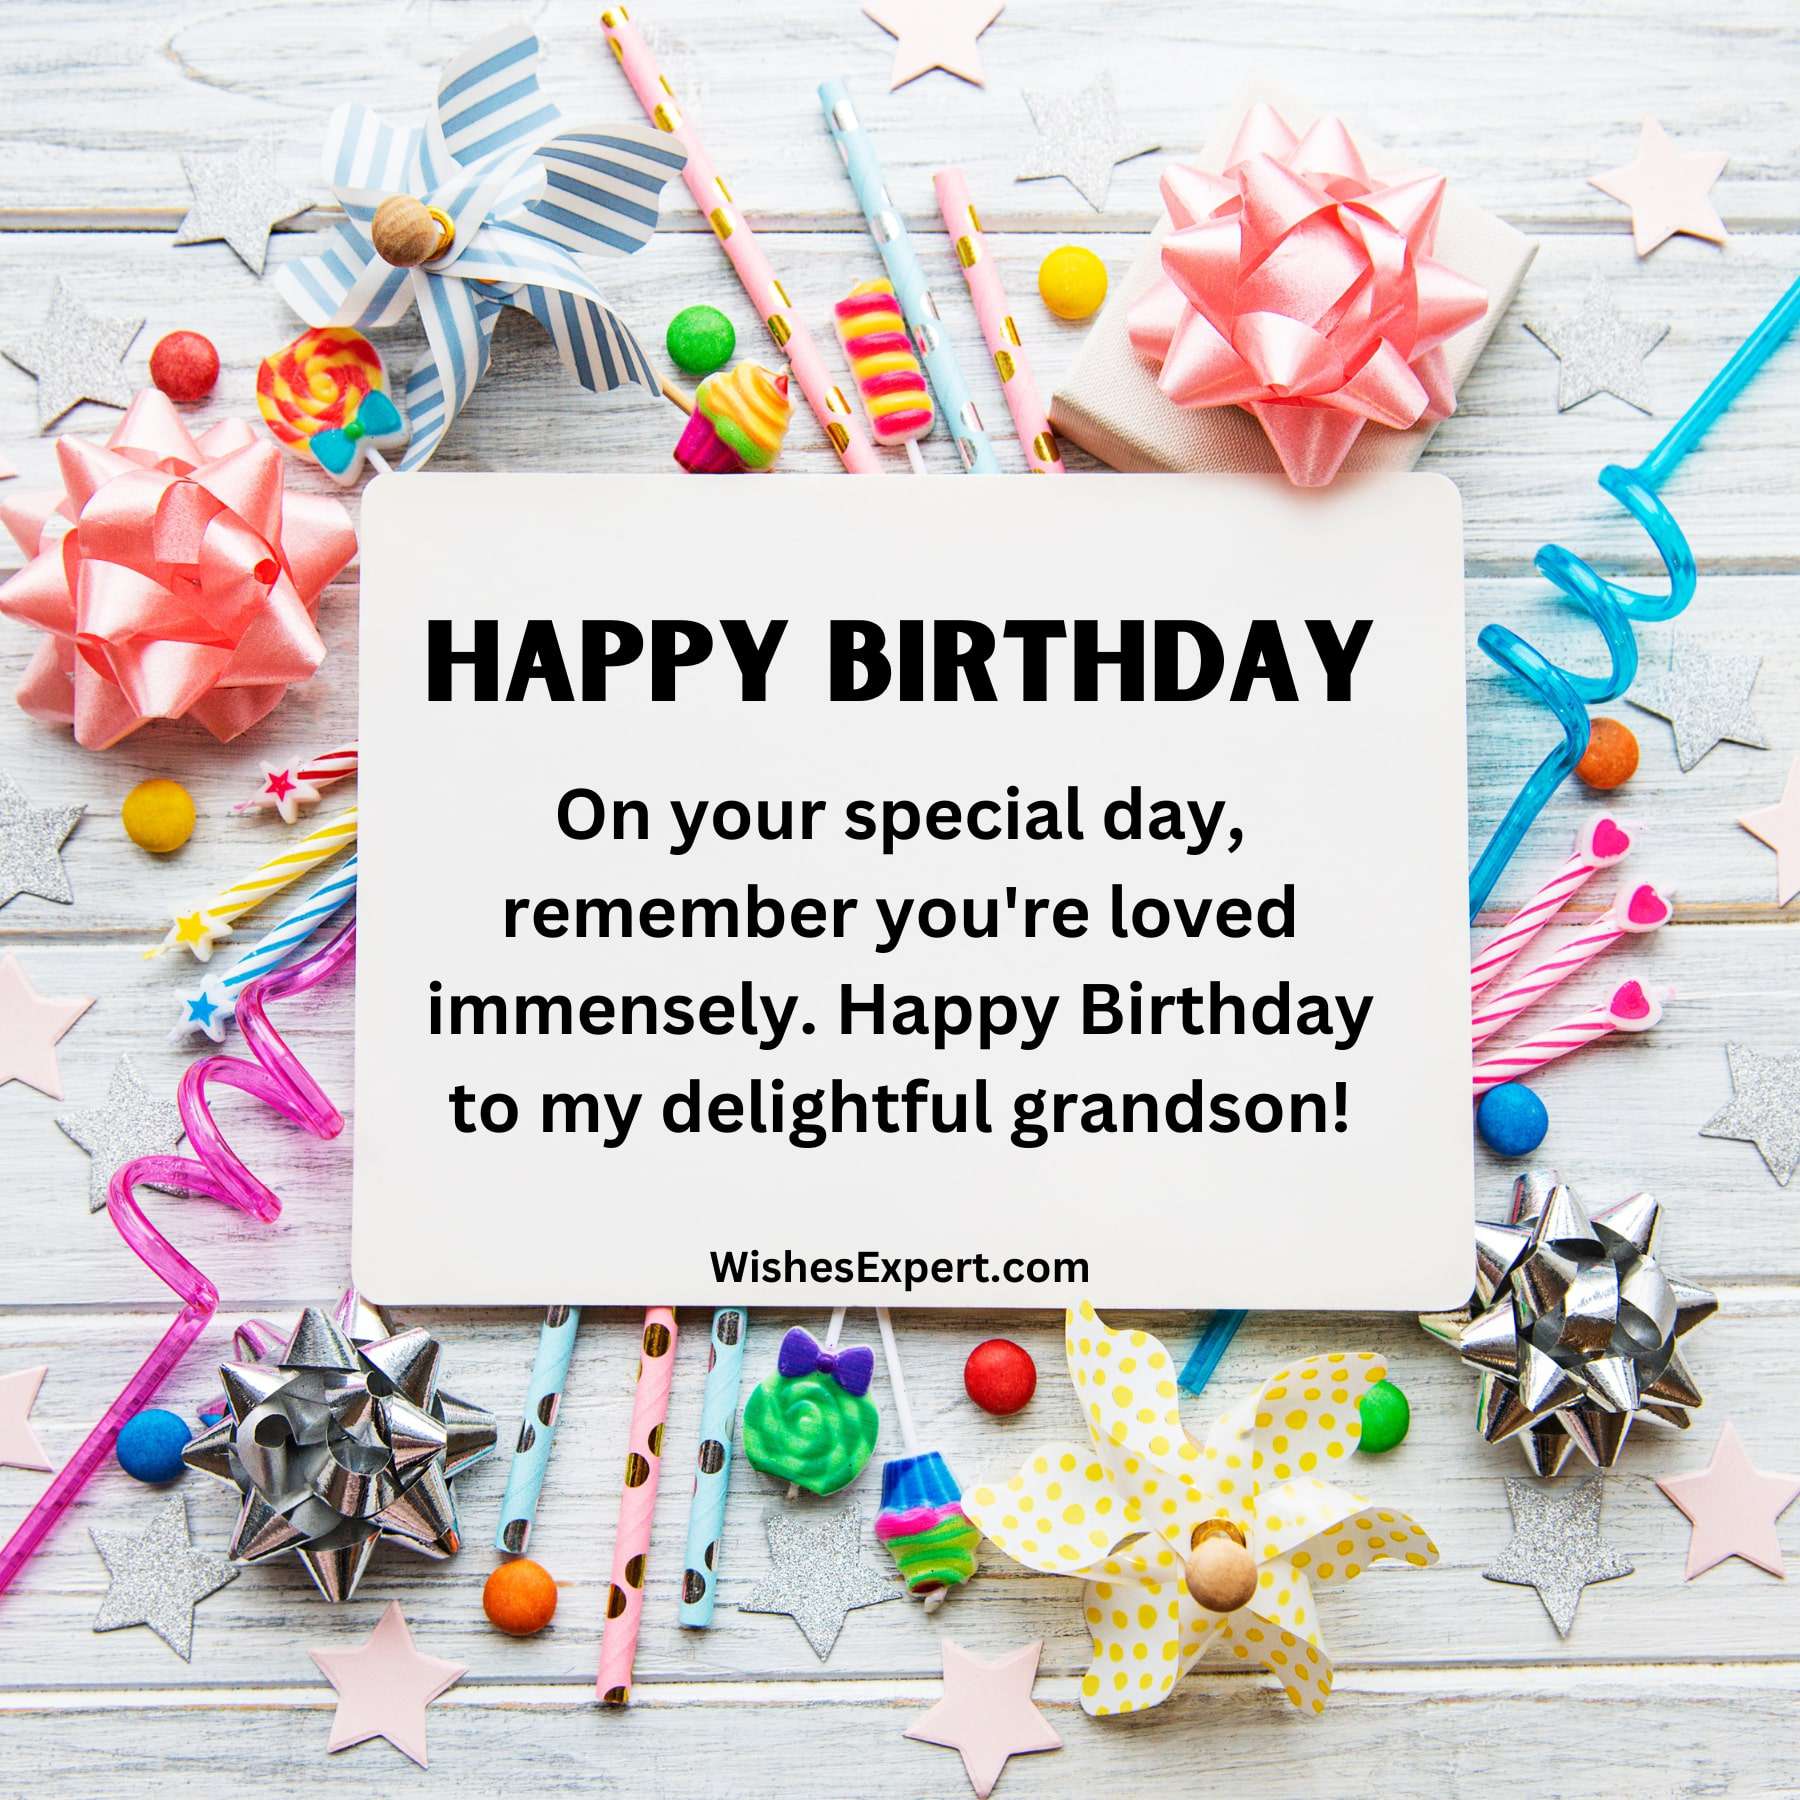 Short-Unique-Birthday-Greetings-for-First-Born-Grandson